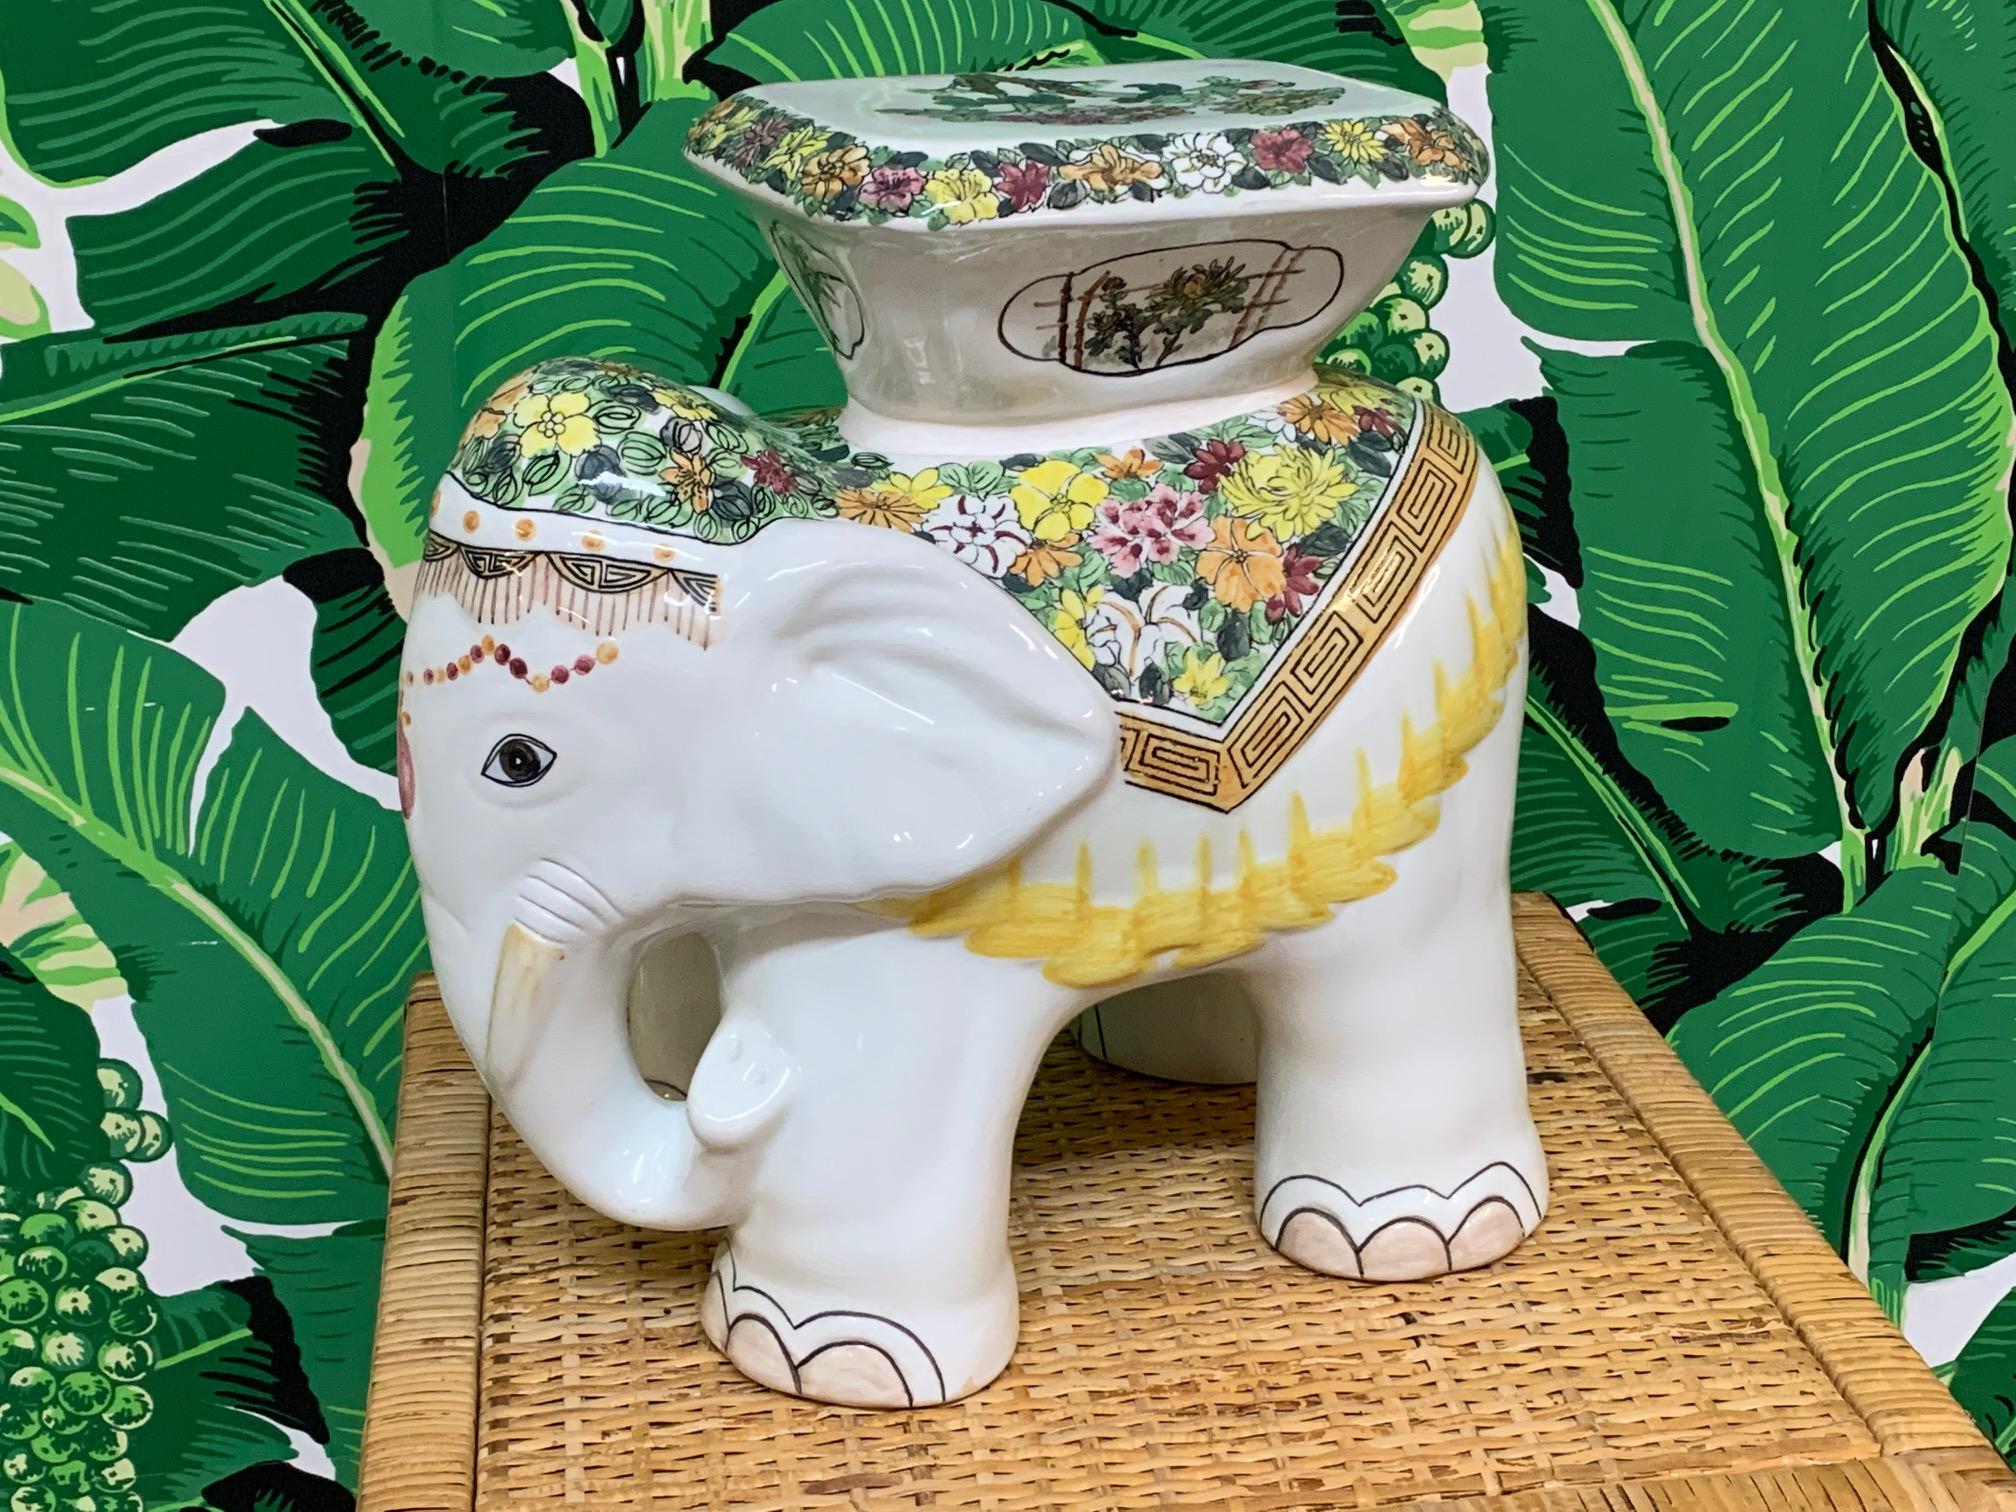 Cute ceramic elephant garden stool, could be used as an end table, finished in glossy white with vibrant flowers. Excellent condition overall.  A9456